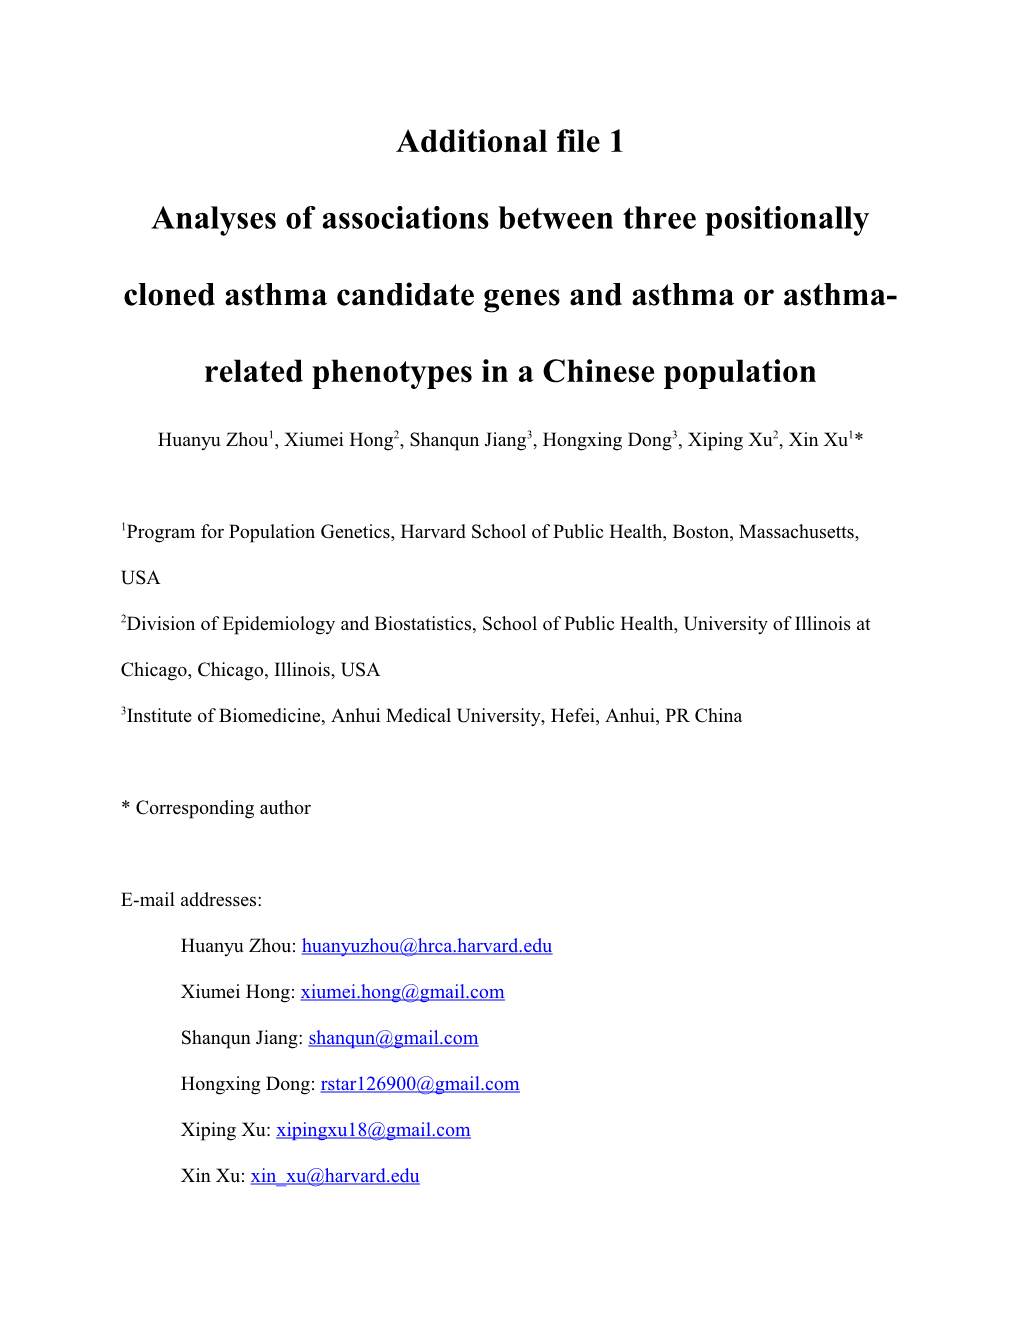 Analyses of Associations Between Three Positionally Cloned Asthma Candidate Genes And